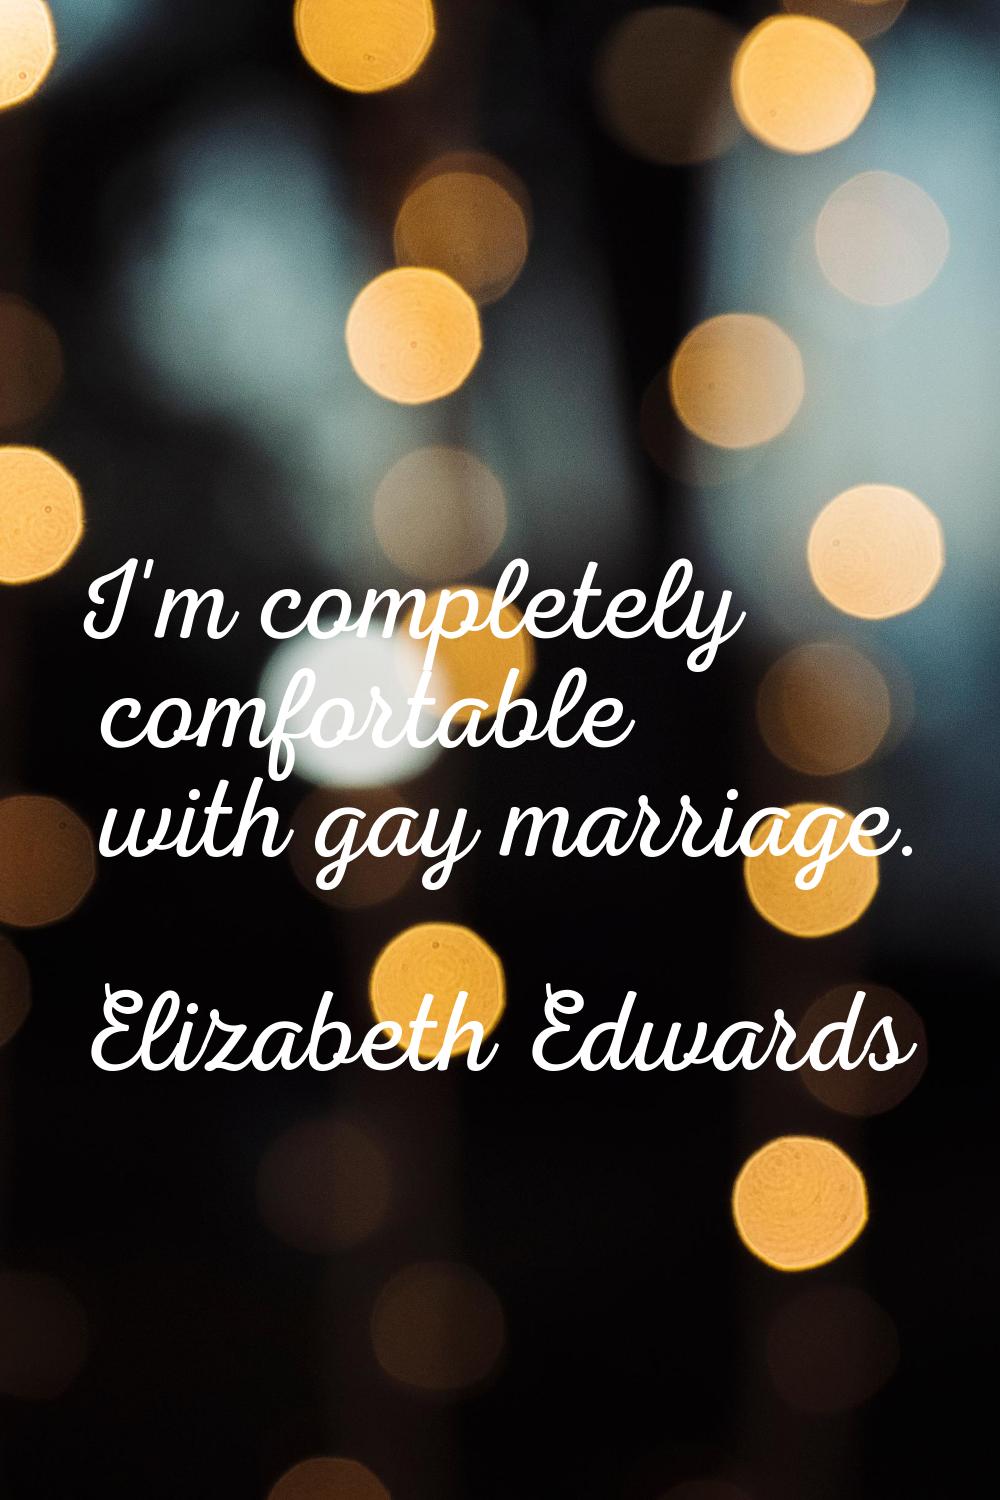 I'm completely comfortable with gay marriage.